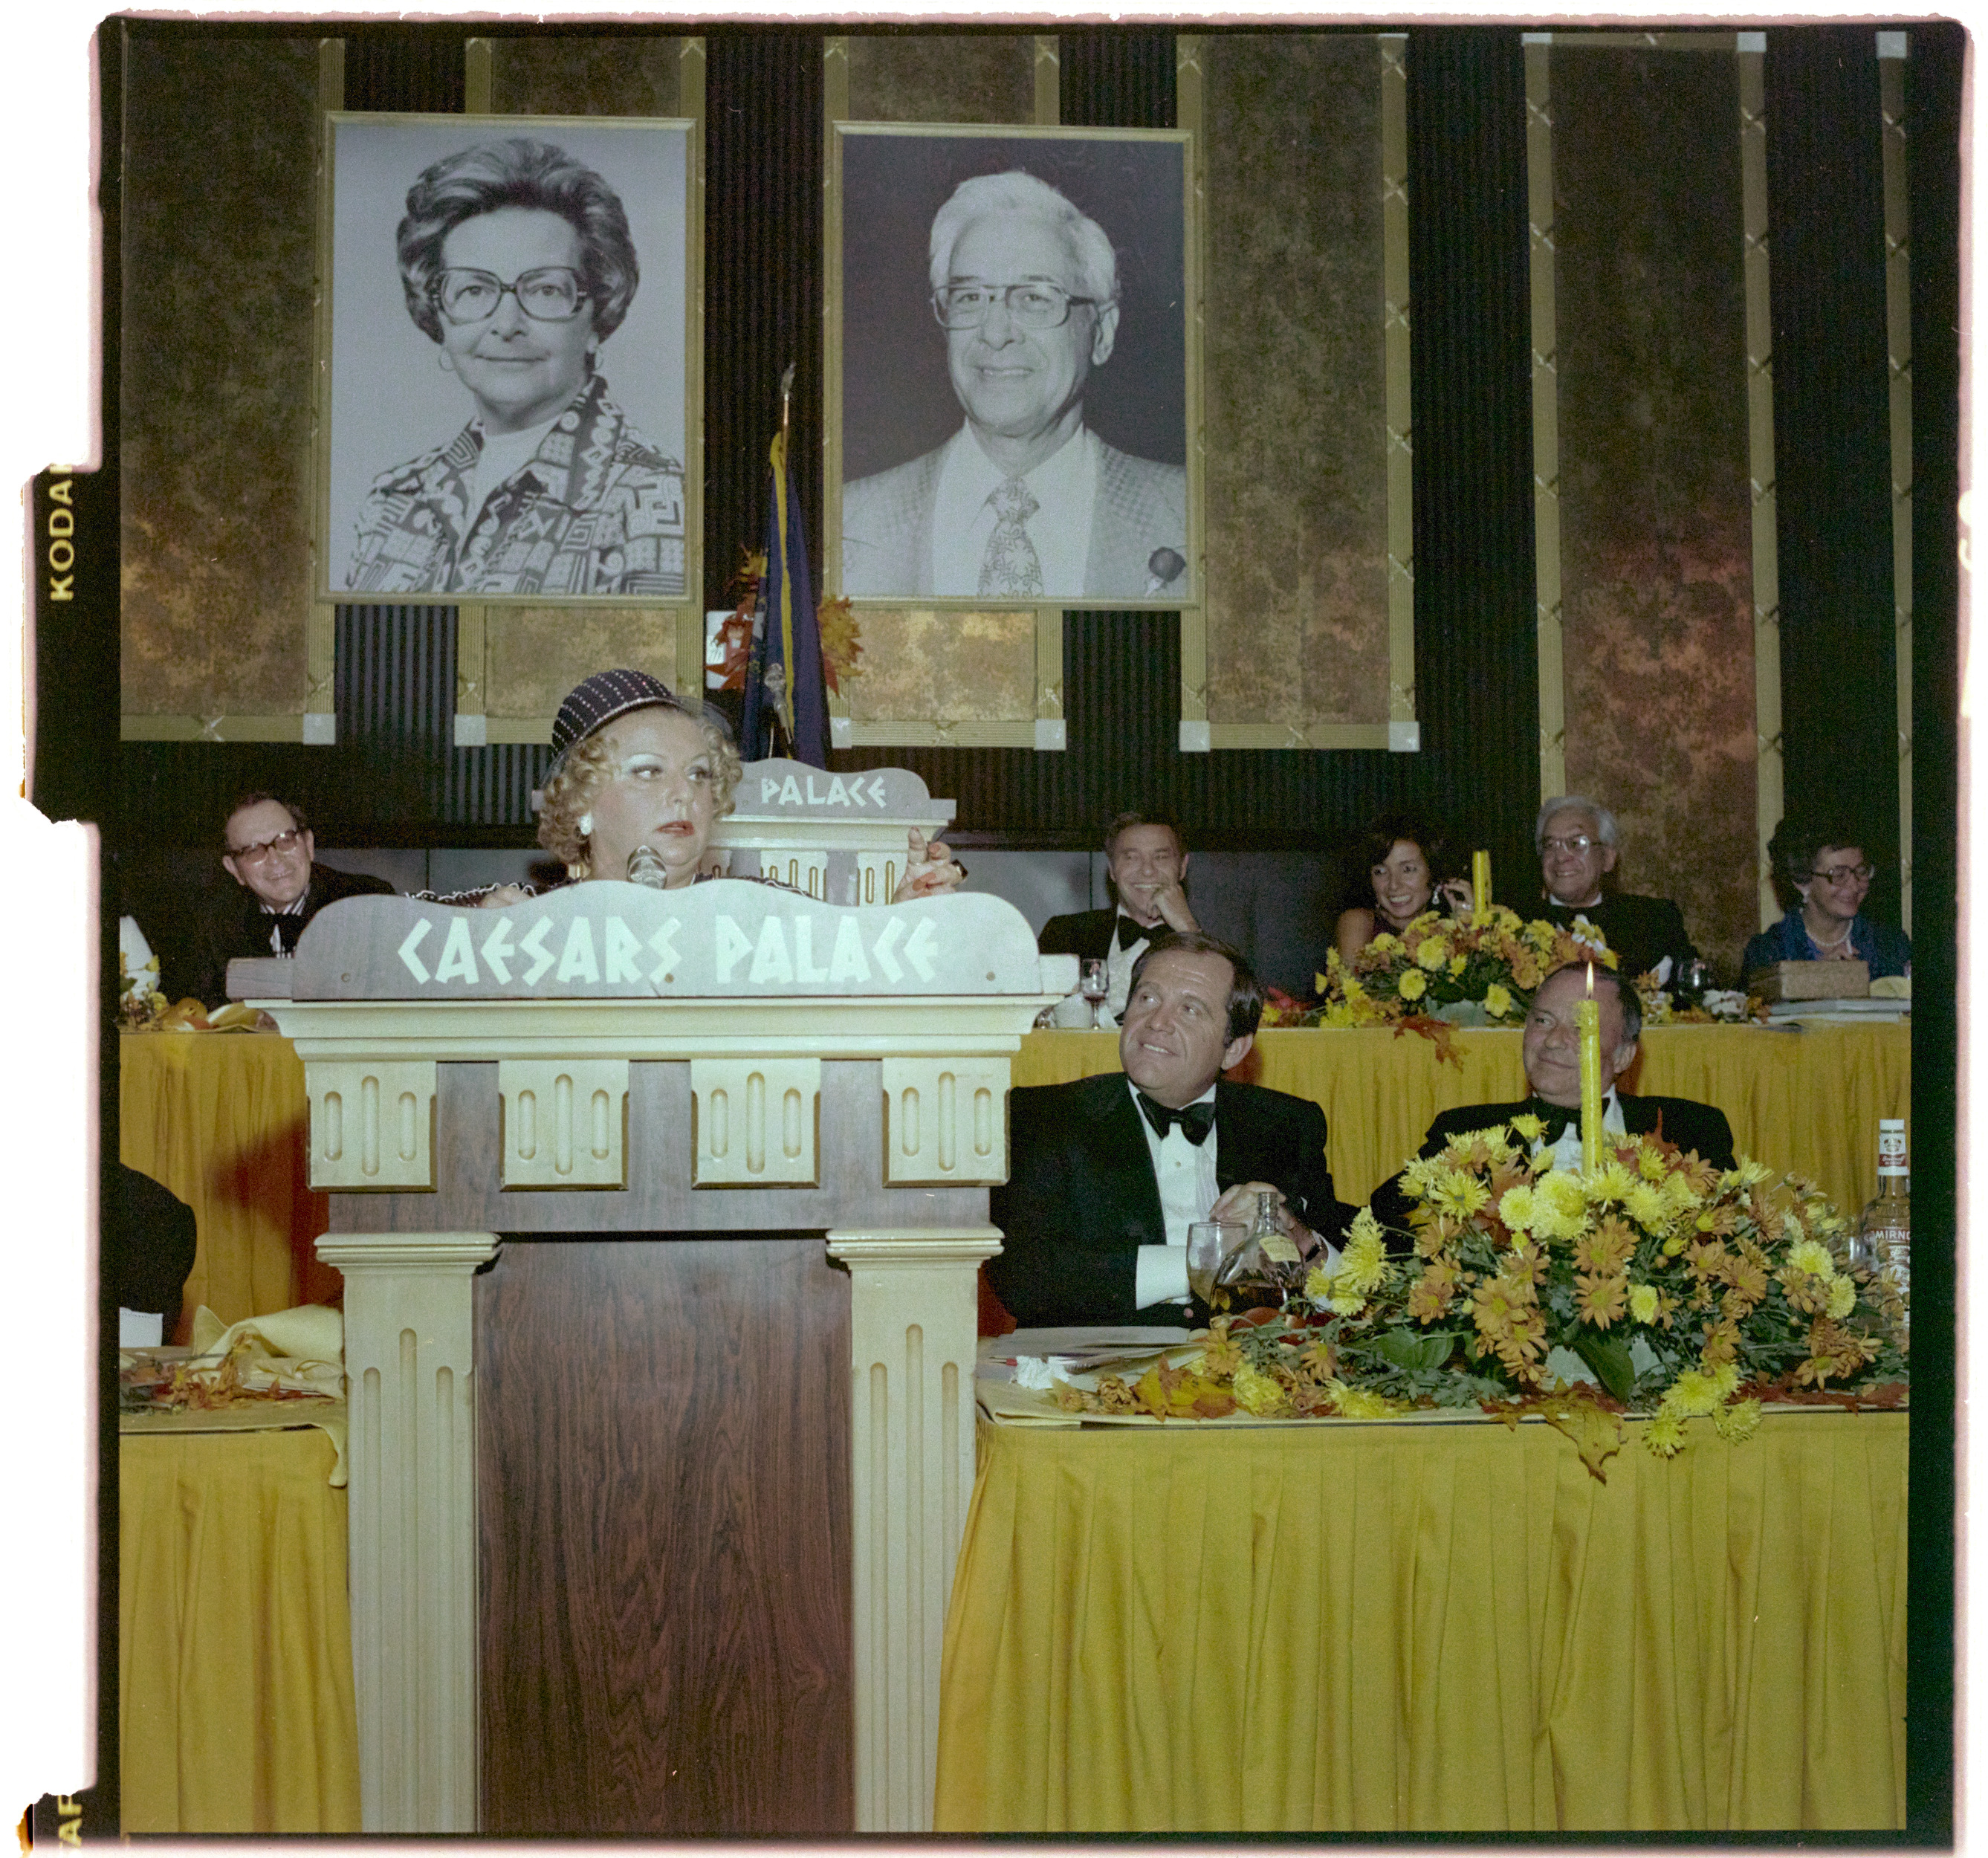 Photographs of Combined Jewish Appeal (Israel Bonds Dinner), image 10